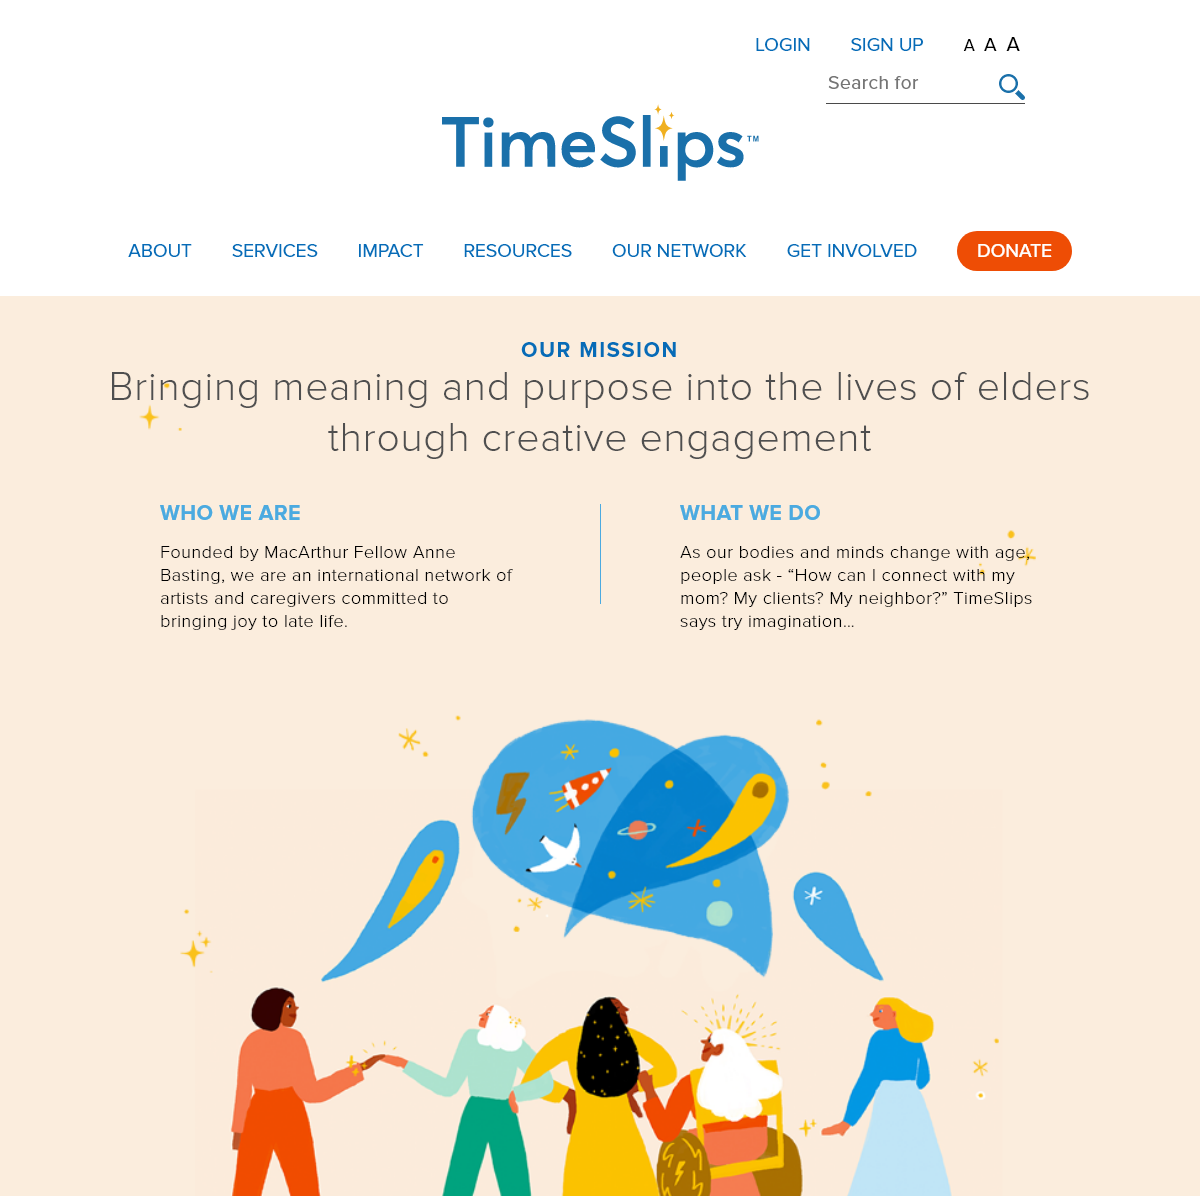 A complete backup of timeslips.org